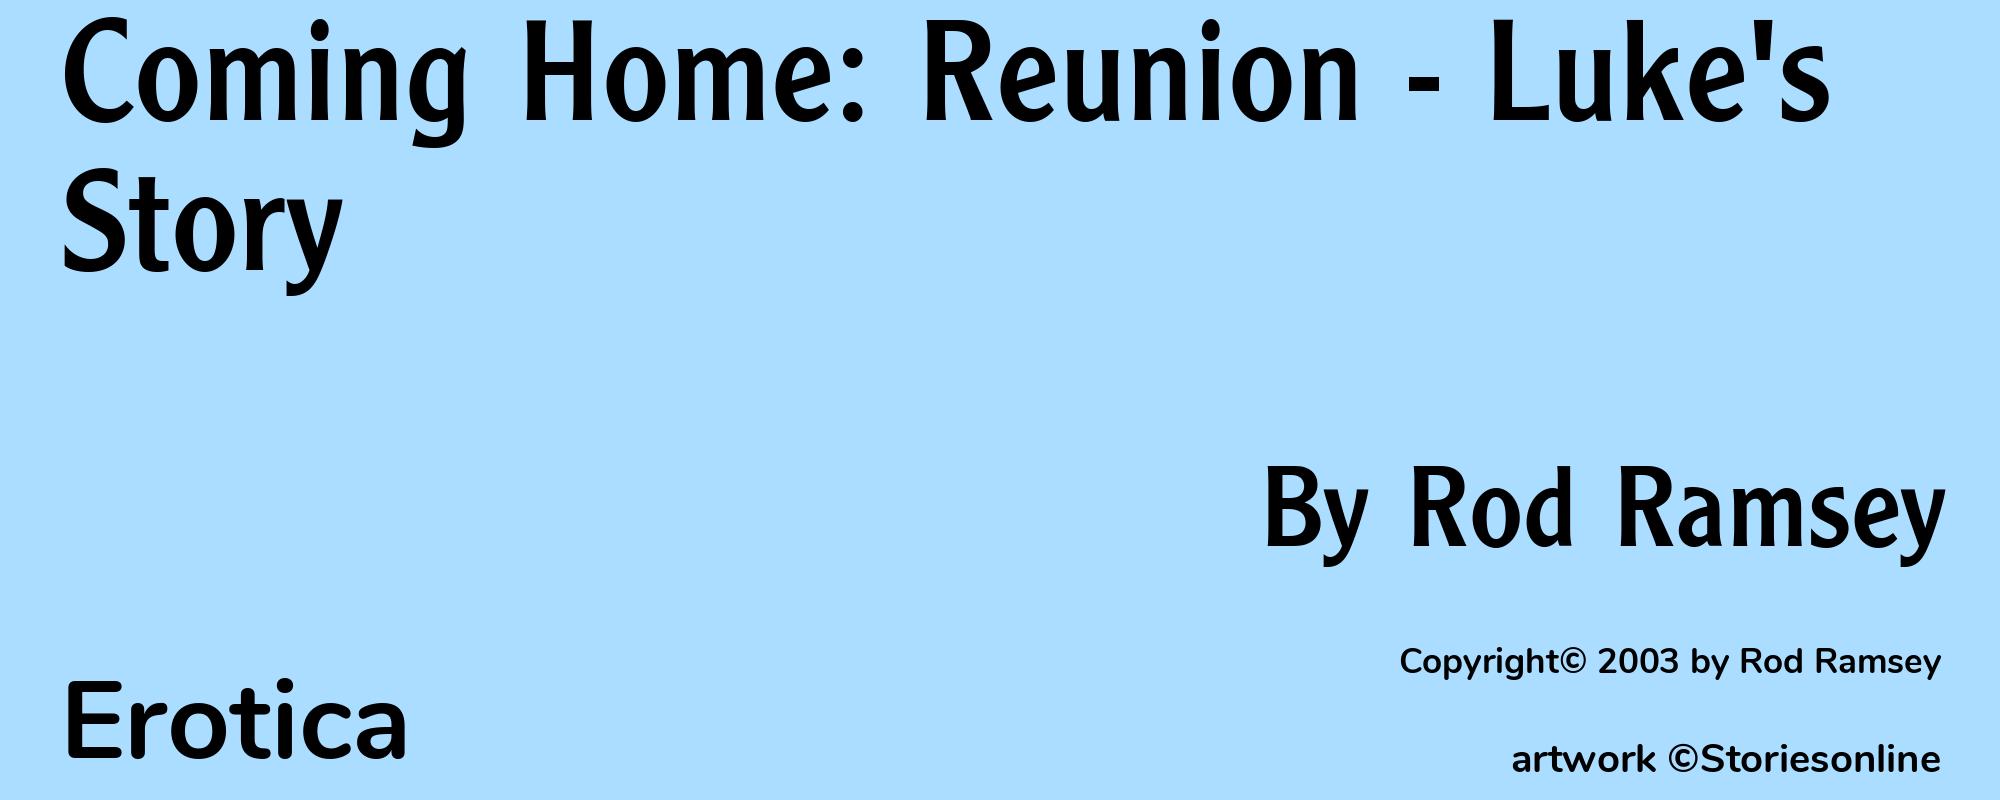 Coming Home: Reunion - Luke's Story - Cover